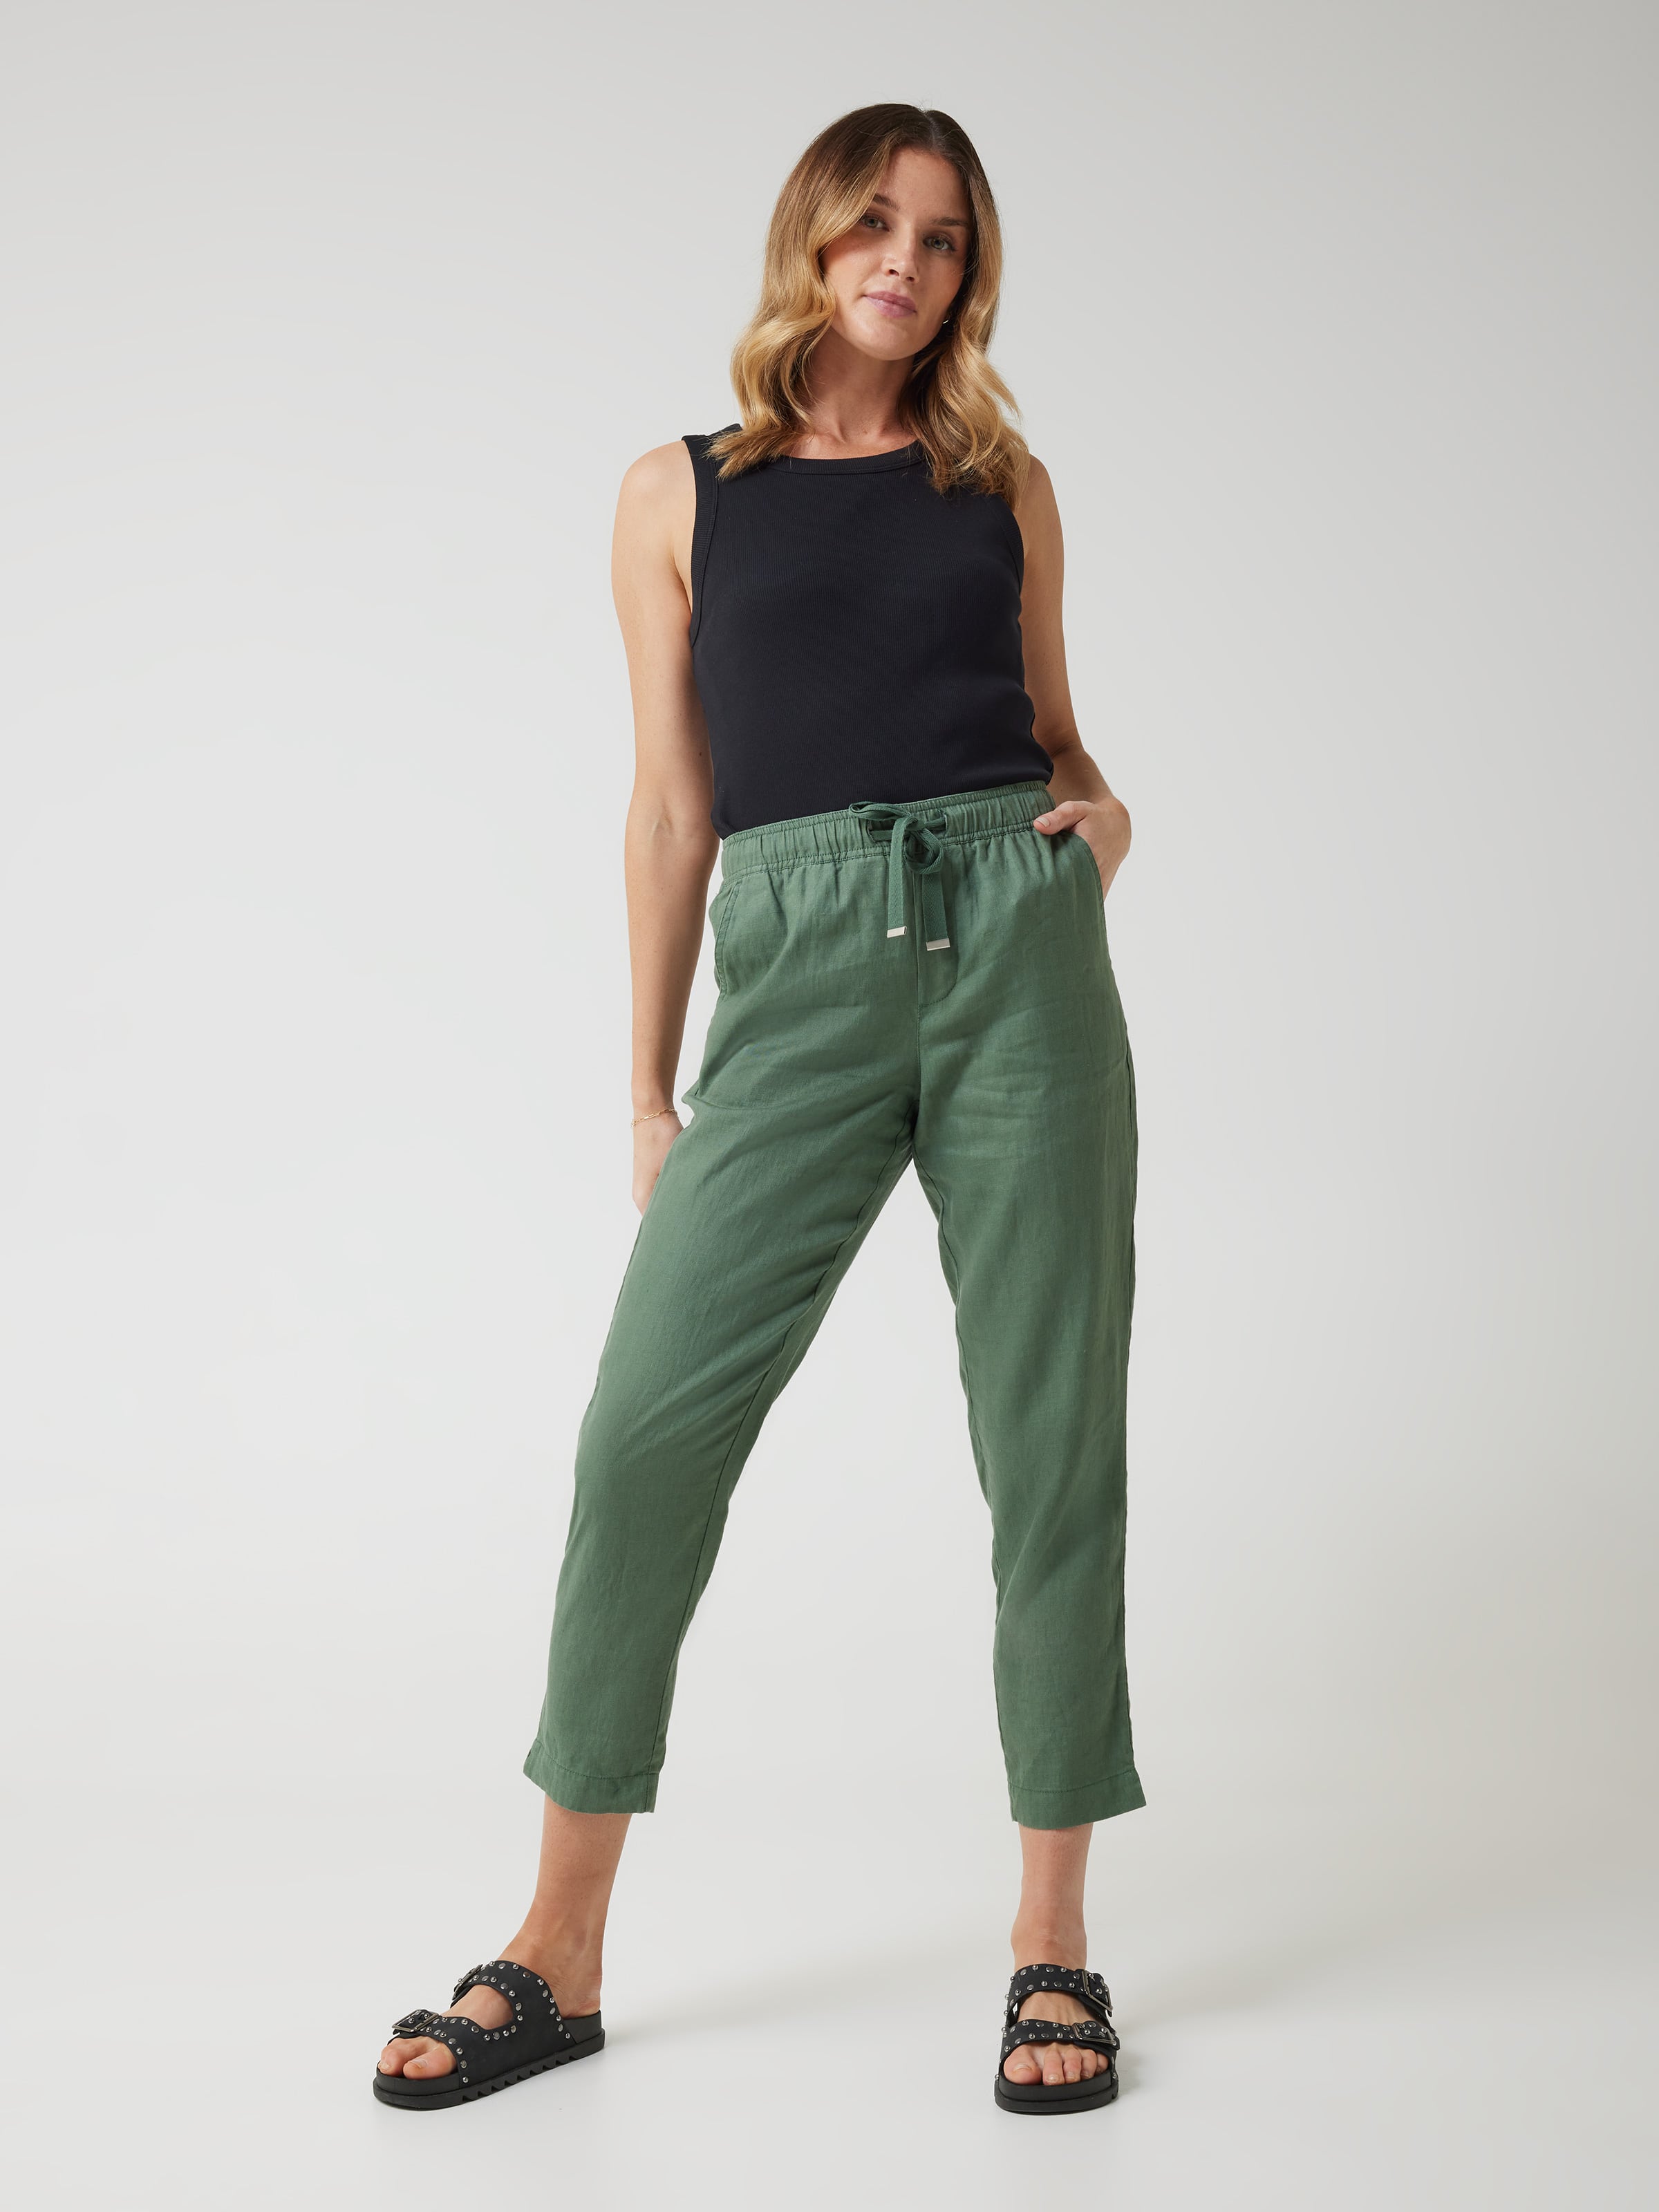 Women's High-Rise Satin Cargo Pants - A New Day Brown 2